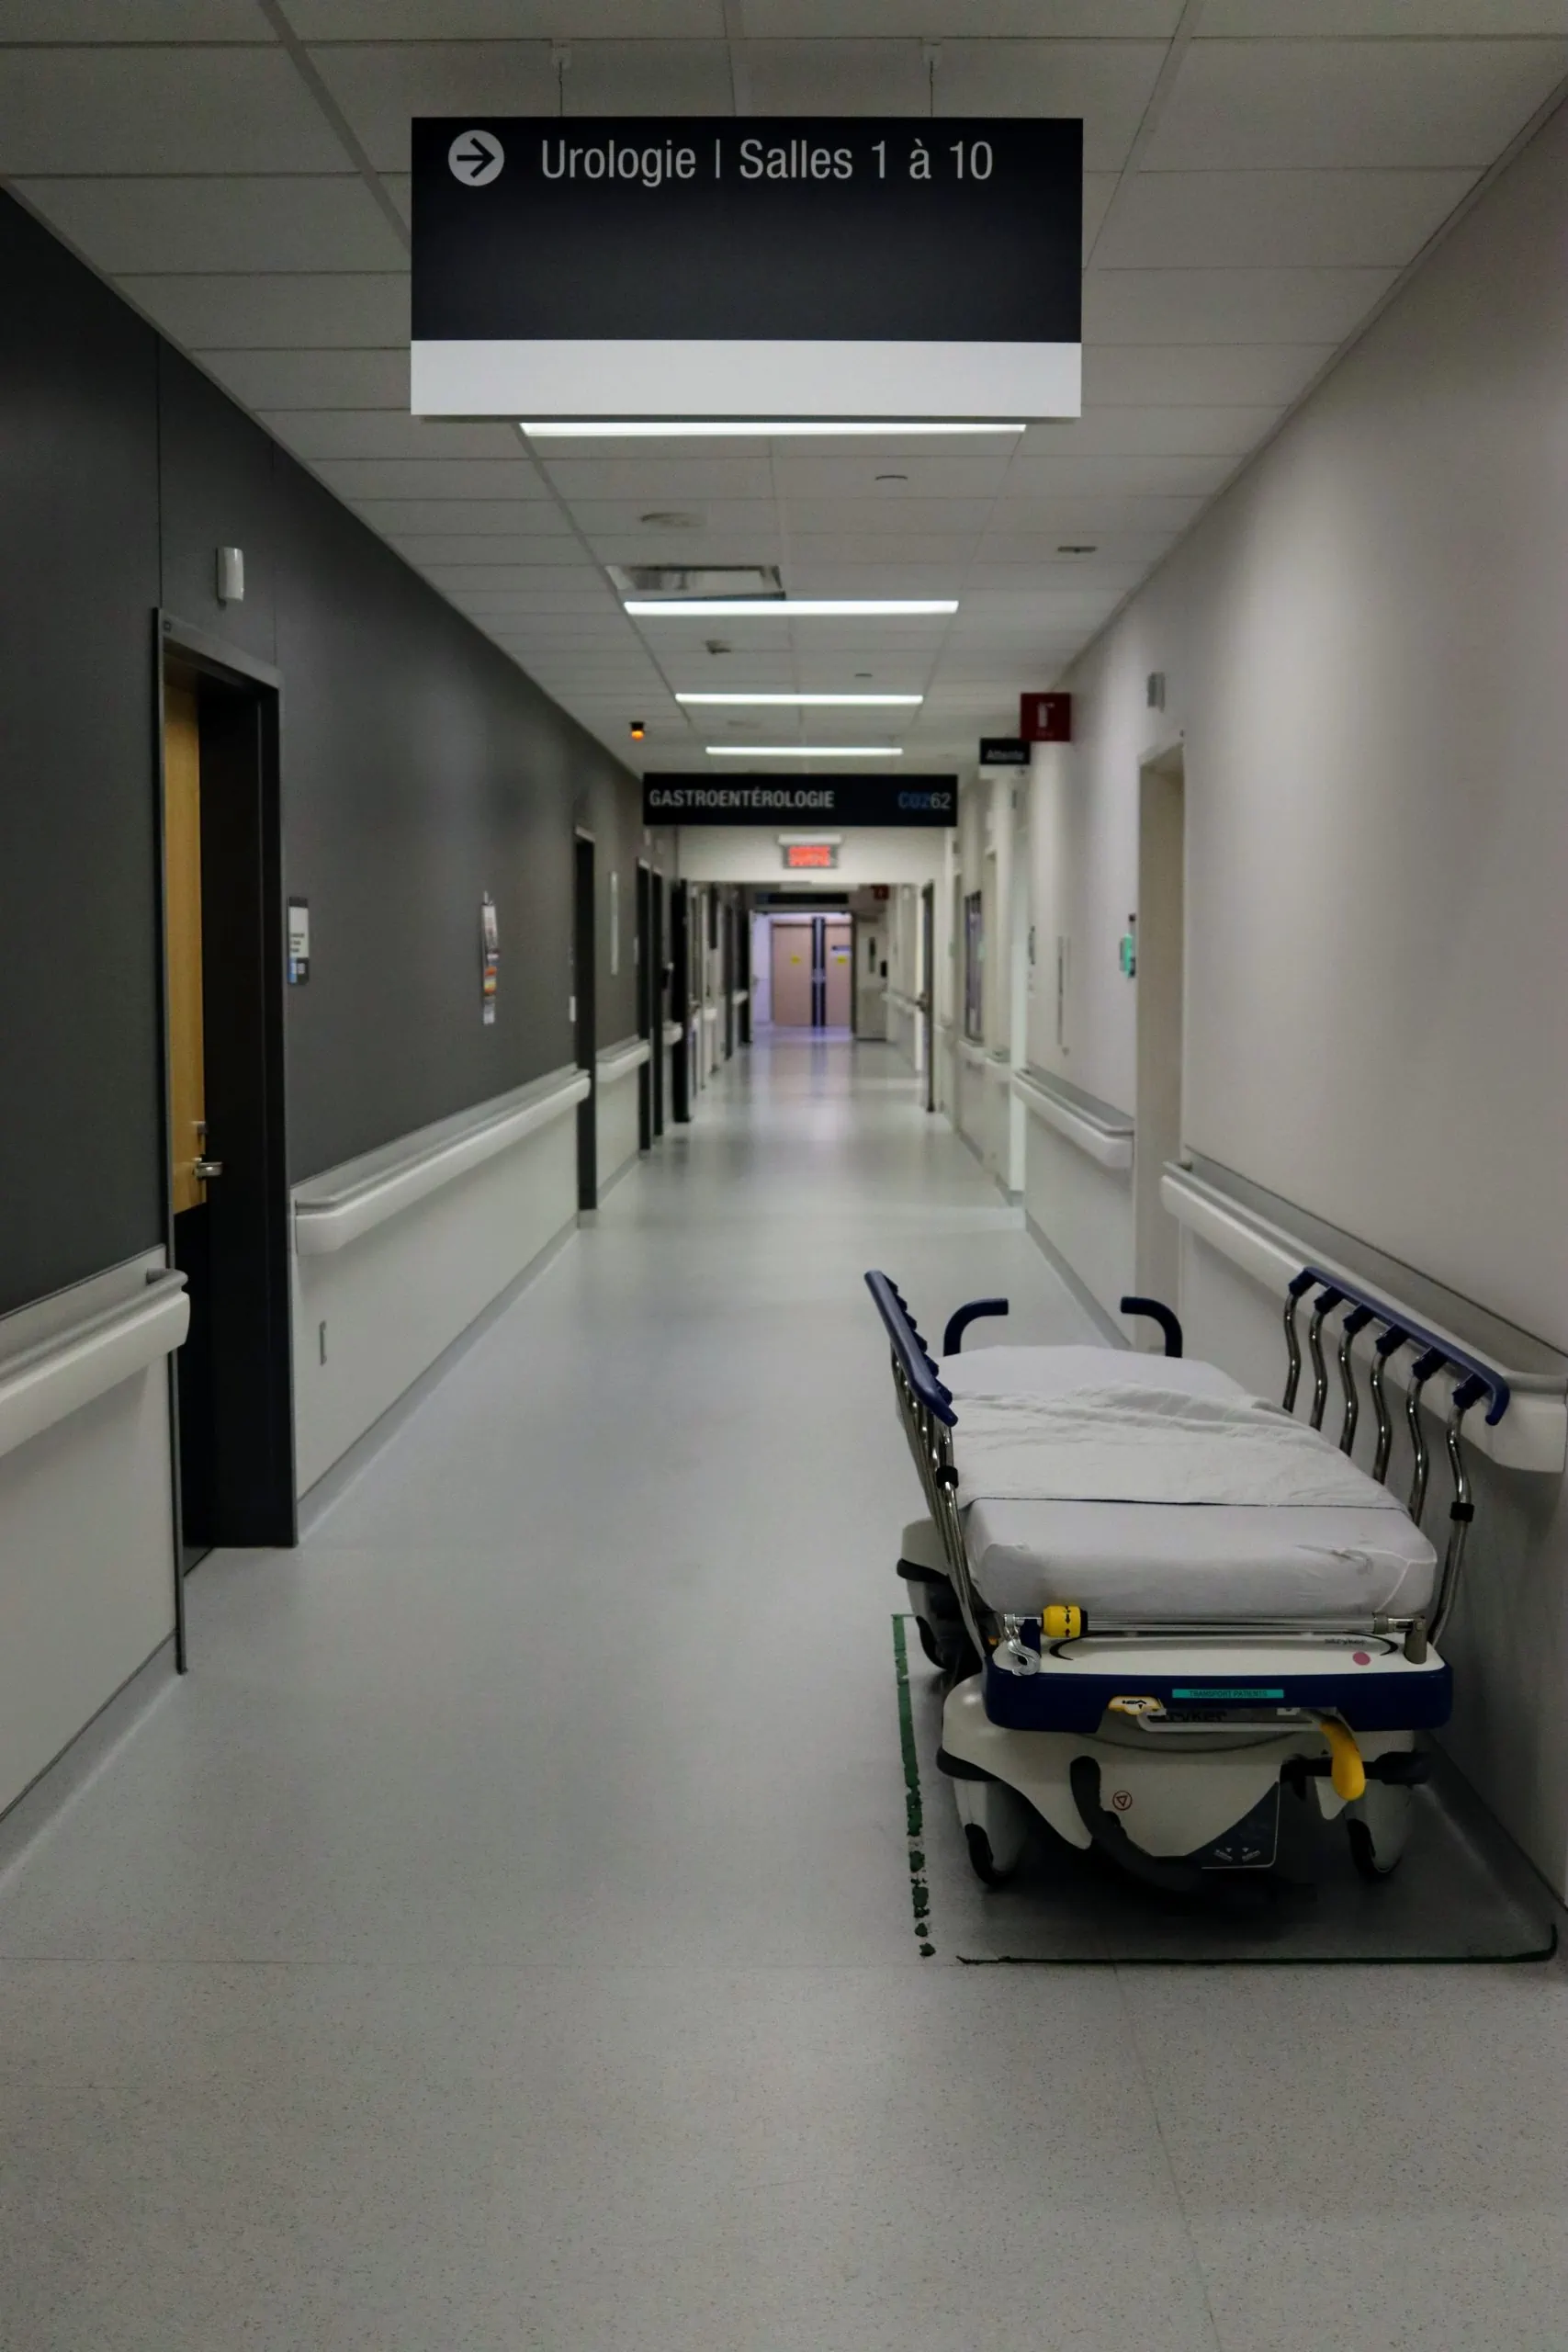 Hallway of healthcare facility protected by Verkada surveillance system with monitor